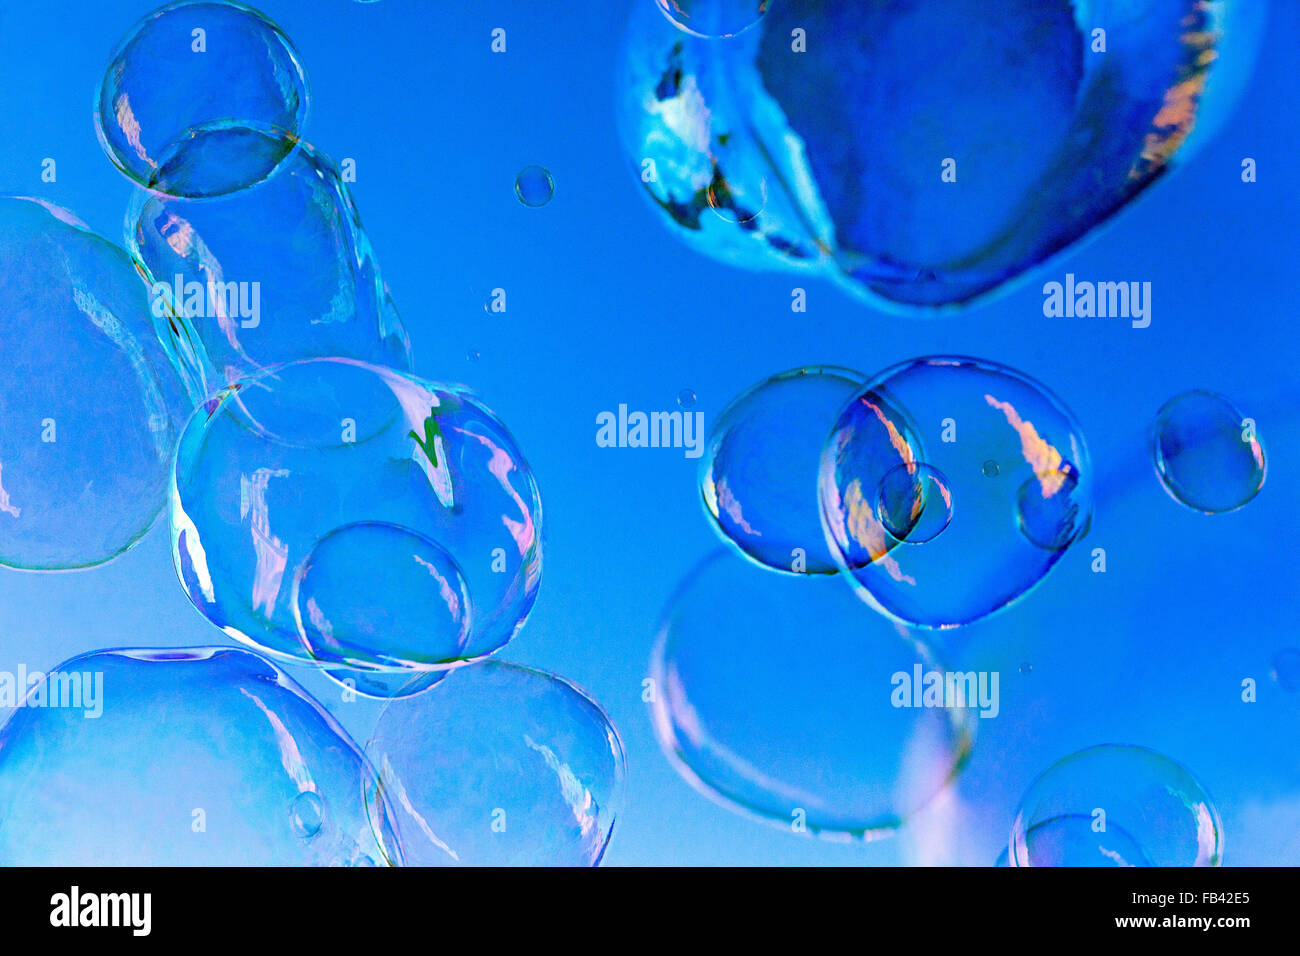 Soap bubbles on a blue background, abstract Stock Photo